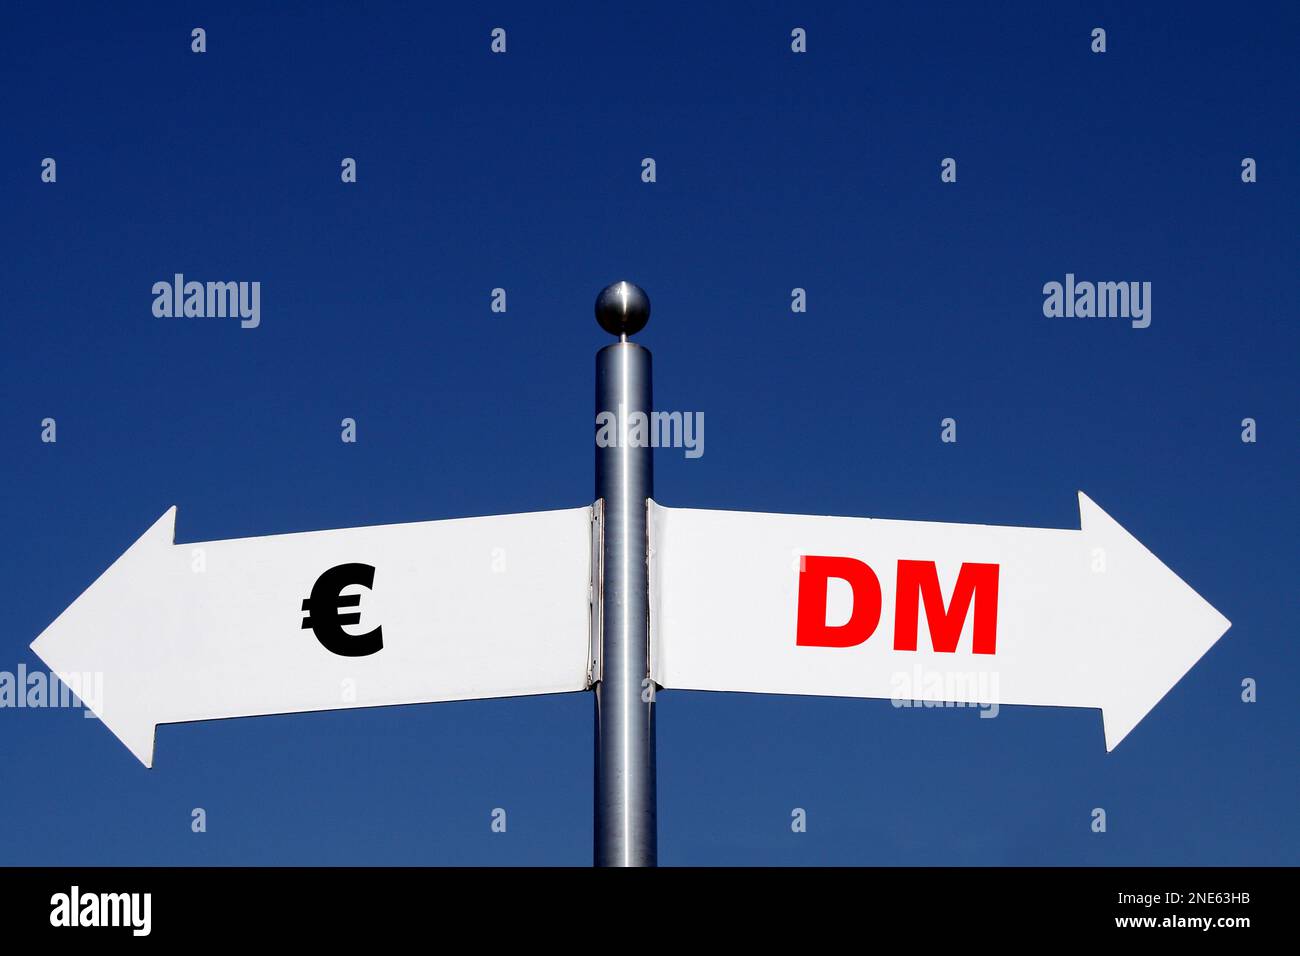 signposts pointing in different directions, options Euro - DM Deutsche Mark Stock Photo